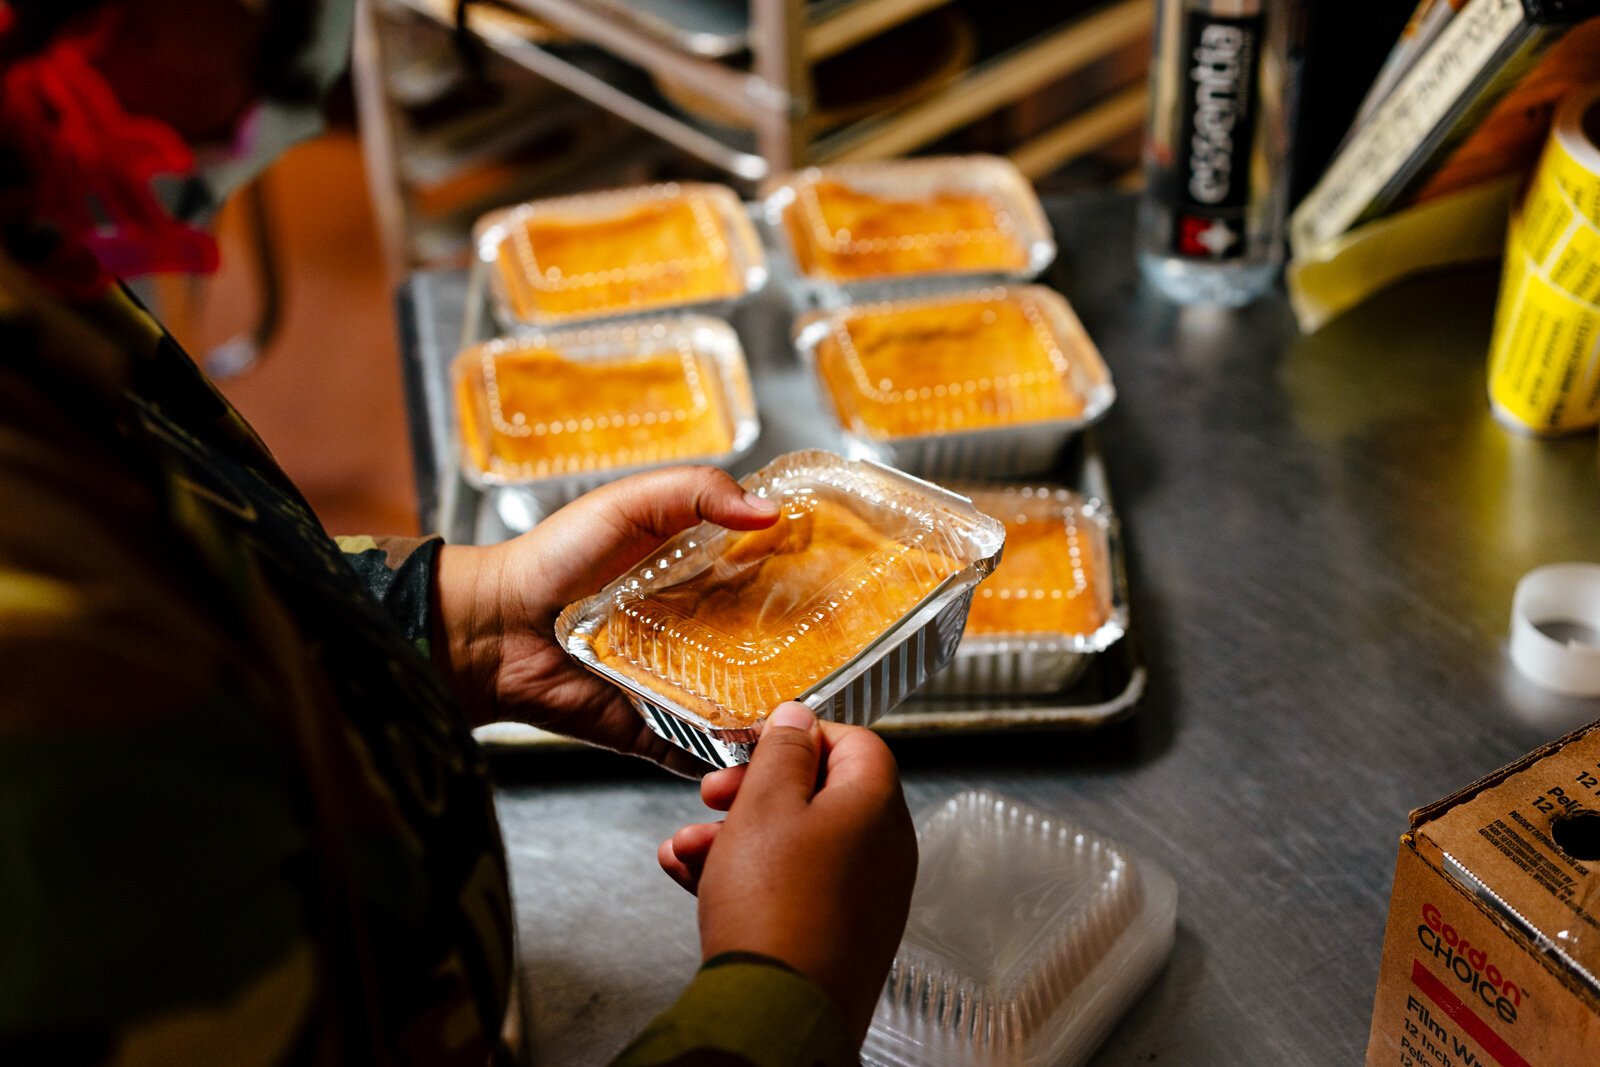 Staff packaging and labeling sweet potato cheesecakes.